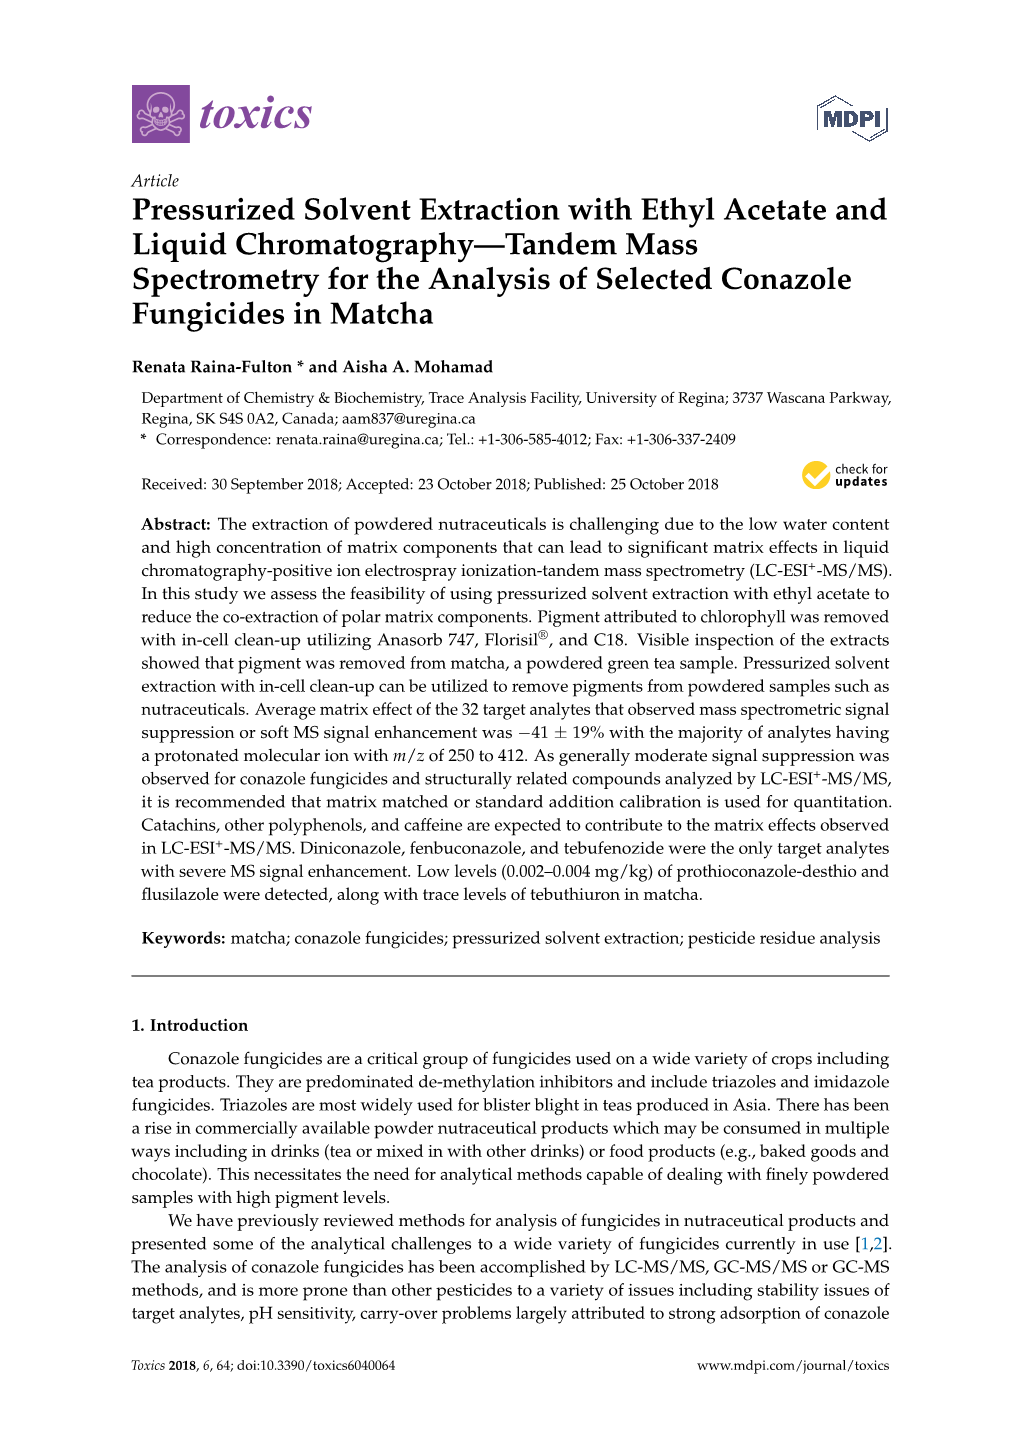 Pressurized Solvent Extraction with Ethyl Acetate and Liquid Chromatography—Tandem Mass Spectrometry for the Analysis of Selected Conazole Fungicides in Matcha